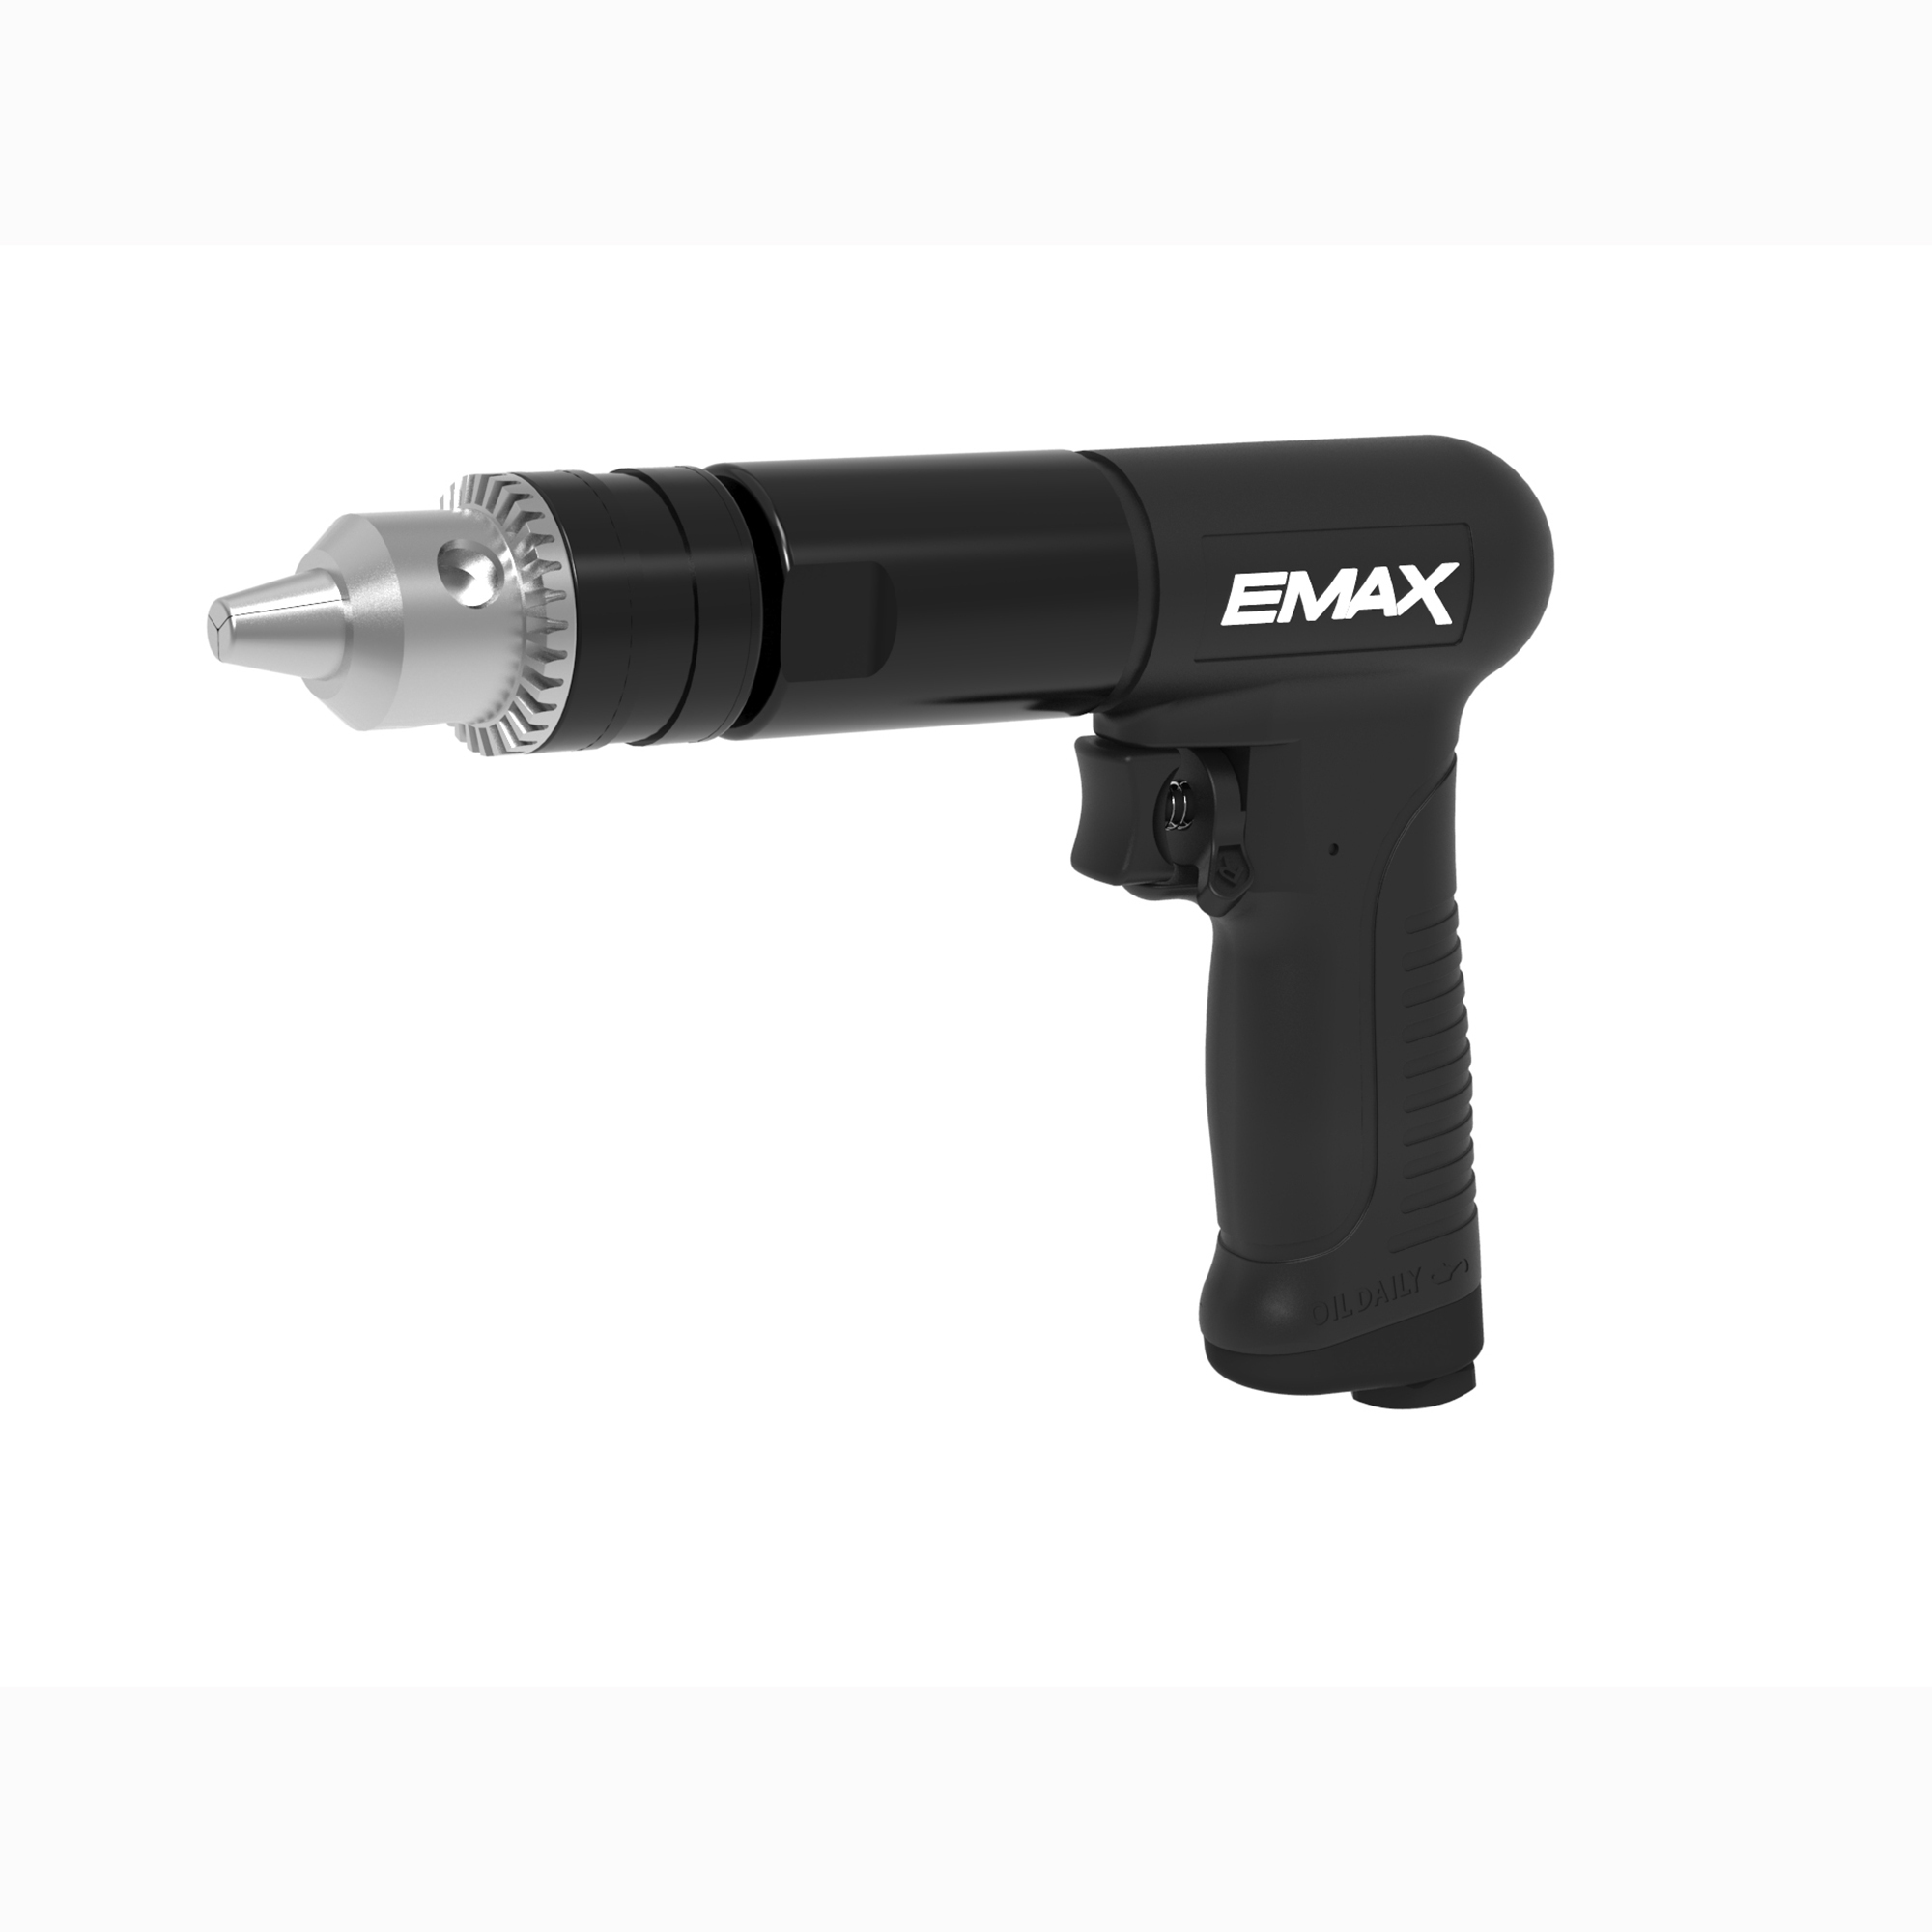 Emax, Composite 1/2Inch Reversible Air Drill-800 RPM, Chuck Size 1/2 in, Tool Length 7.5 in, Max. RPM 700 Model EATDR05S1P